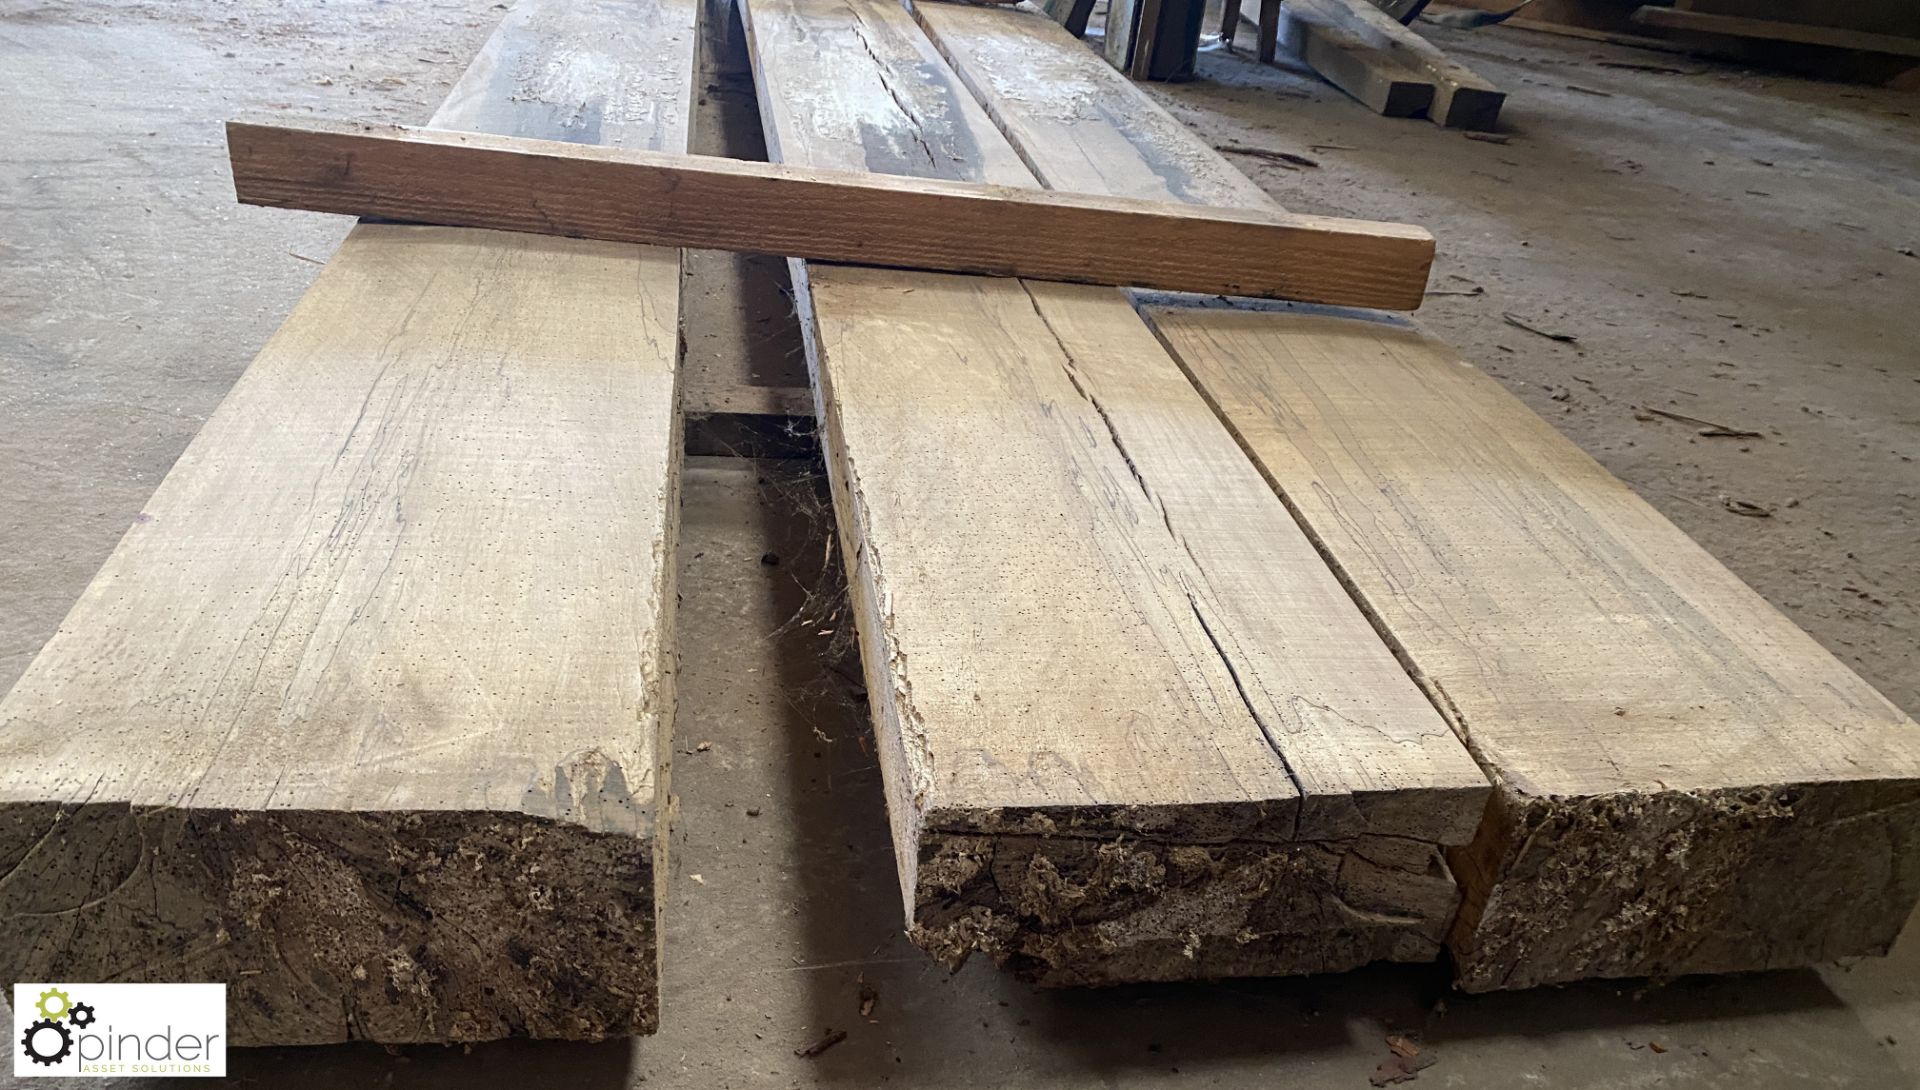 4 Spelted Beech Beams, 5800mm x 320mm x 160mm / 5800mm x 320mm x 100mm / 5800mm x 320mm x 150mm / - Image 12 of 14